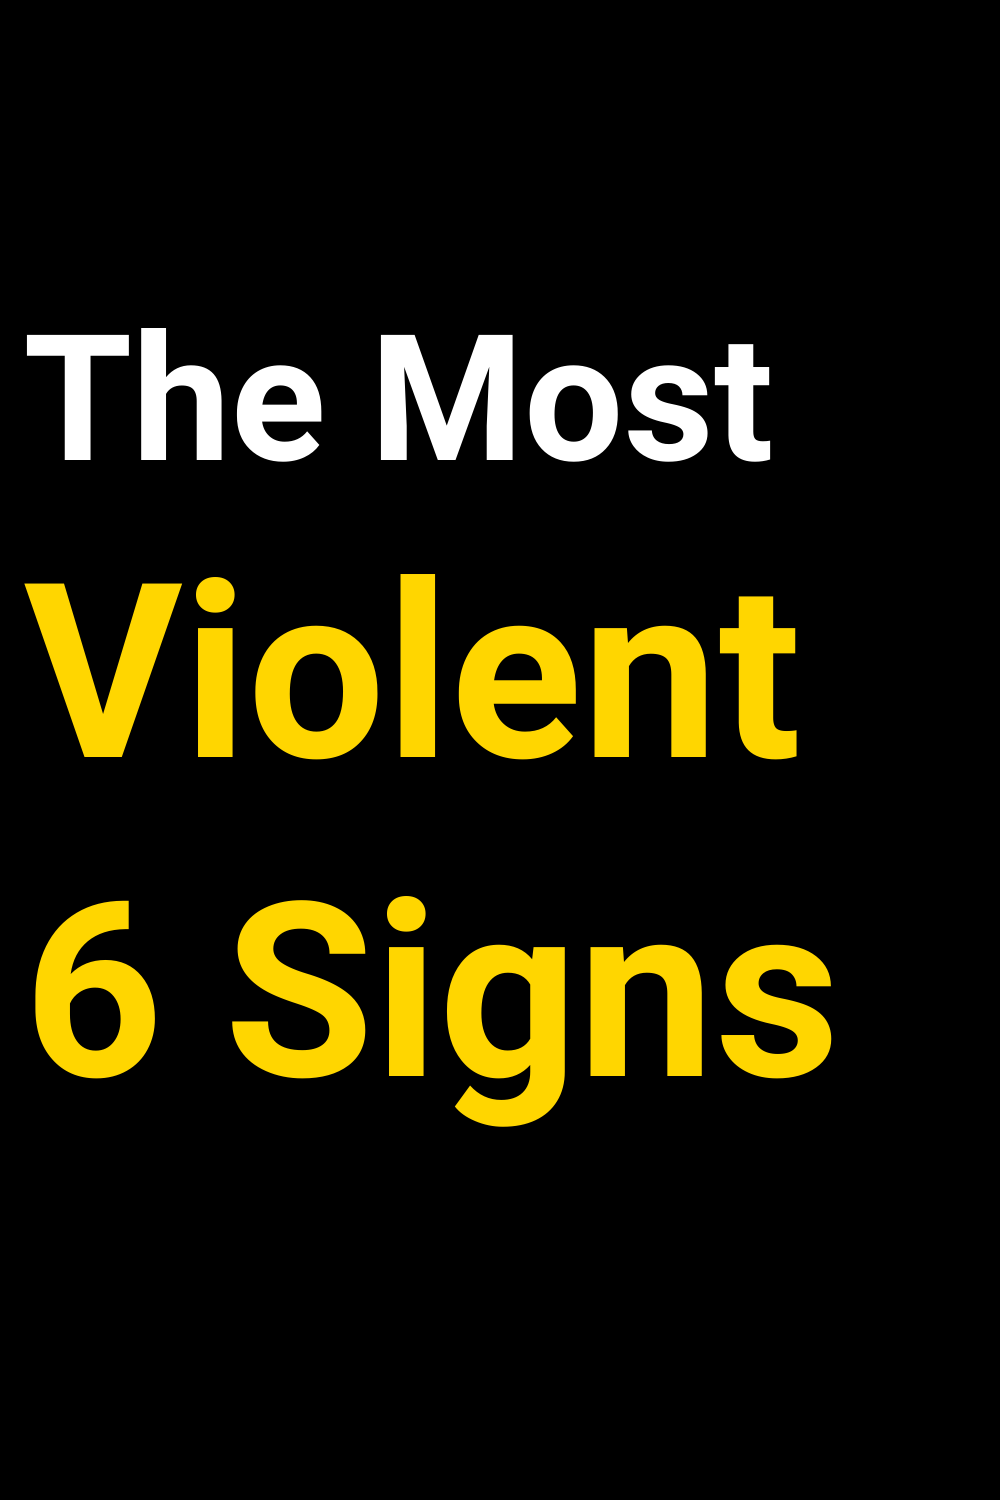 The Most Violent 6 Signs